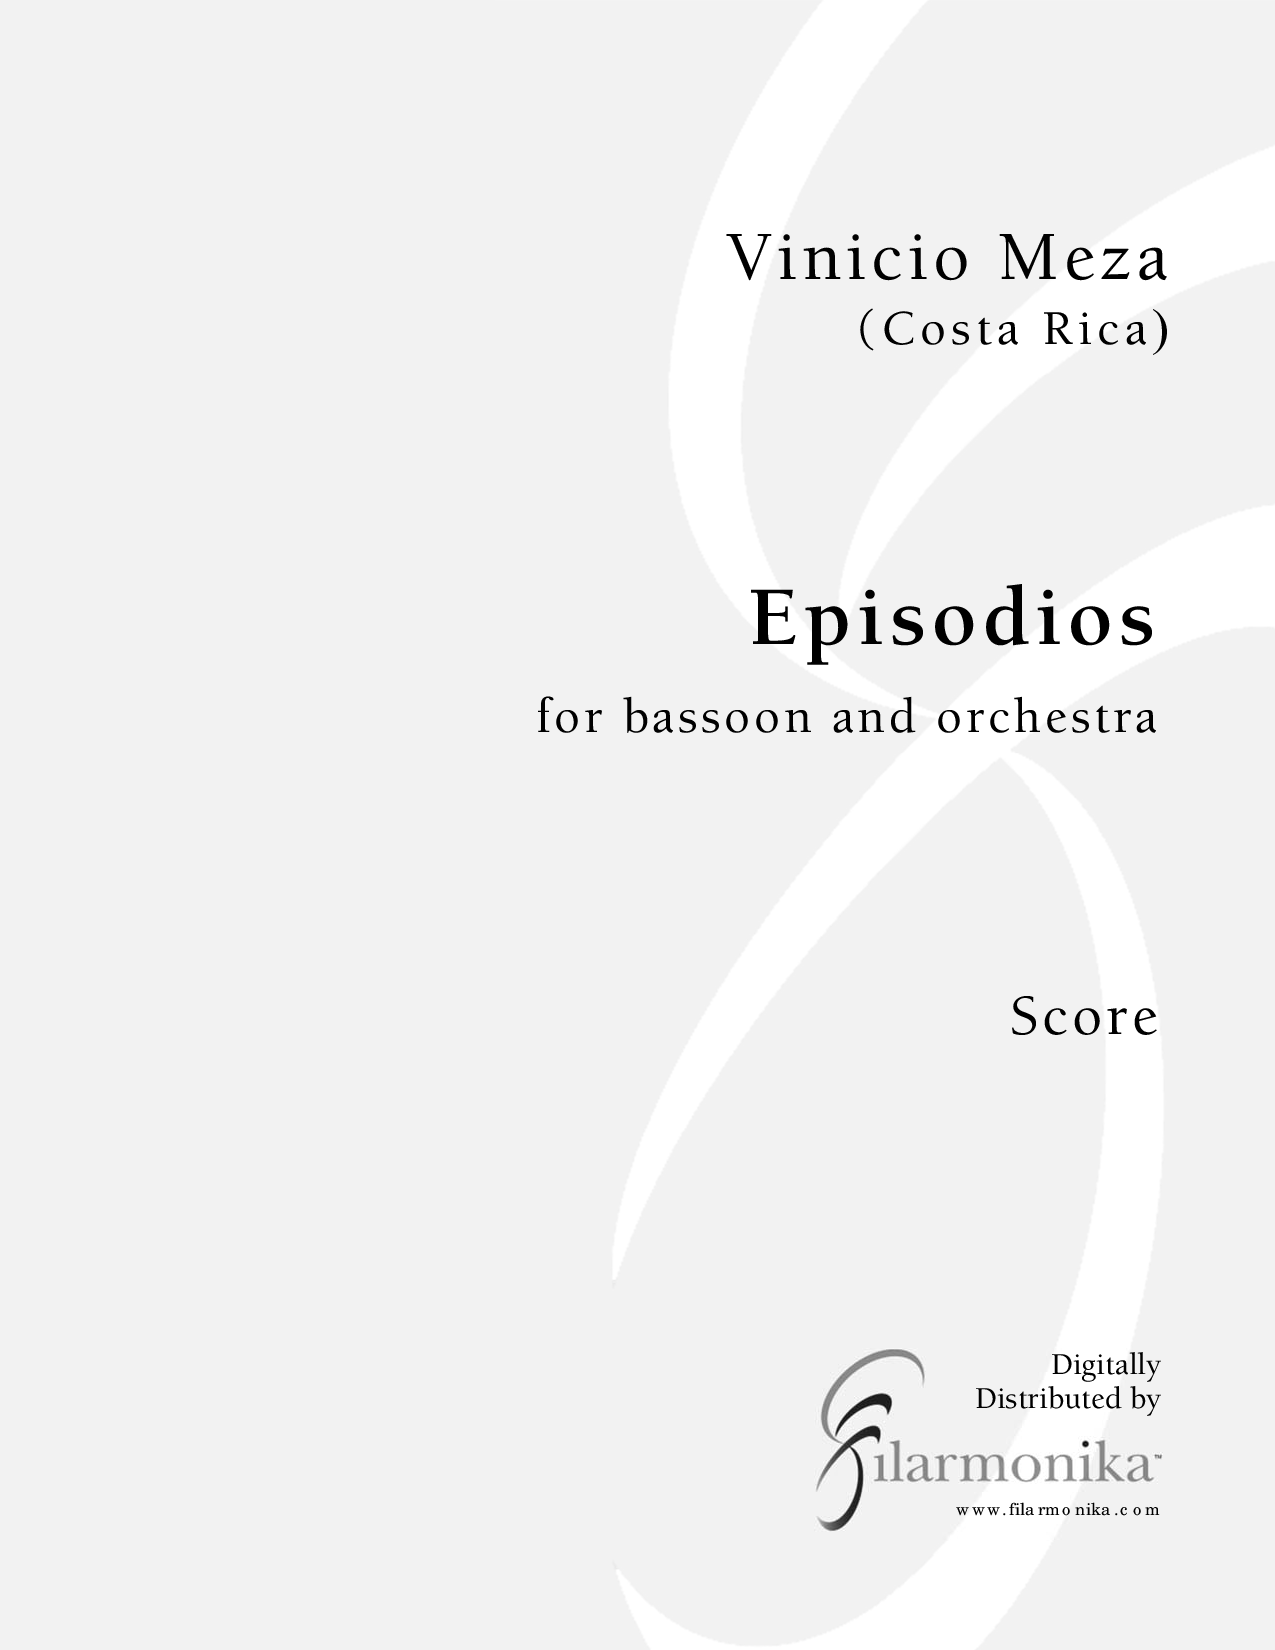 Episodios, for basoon and orchestra